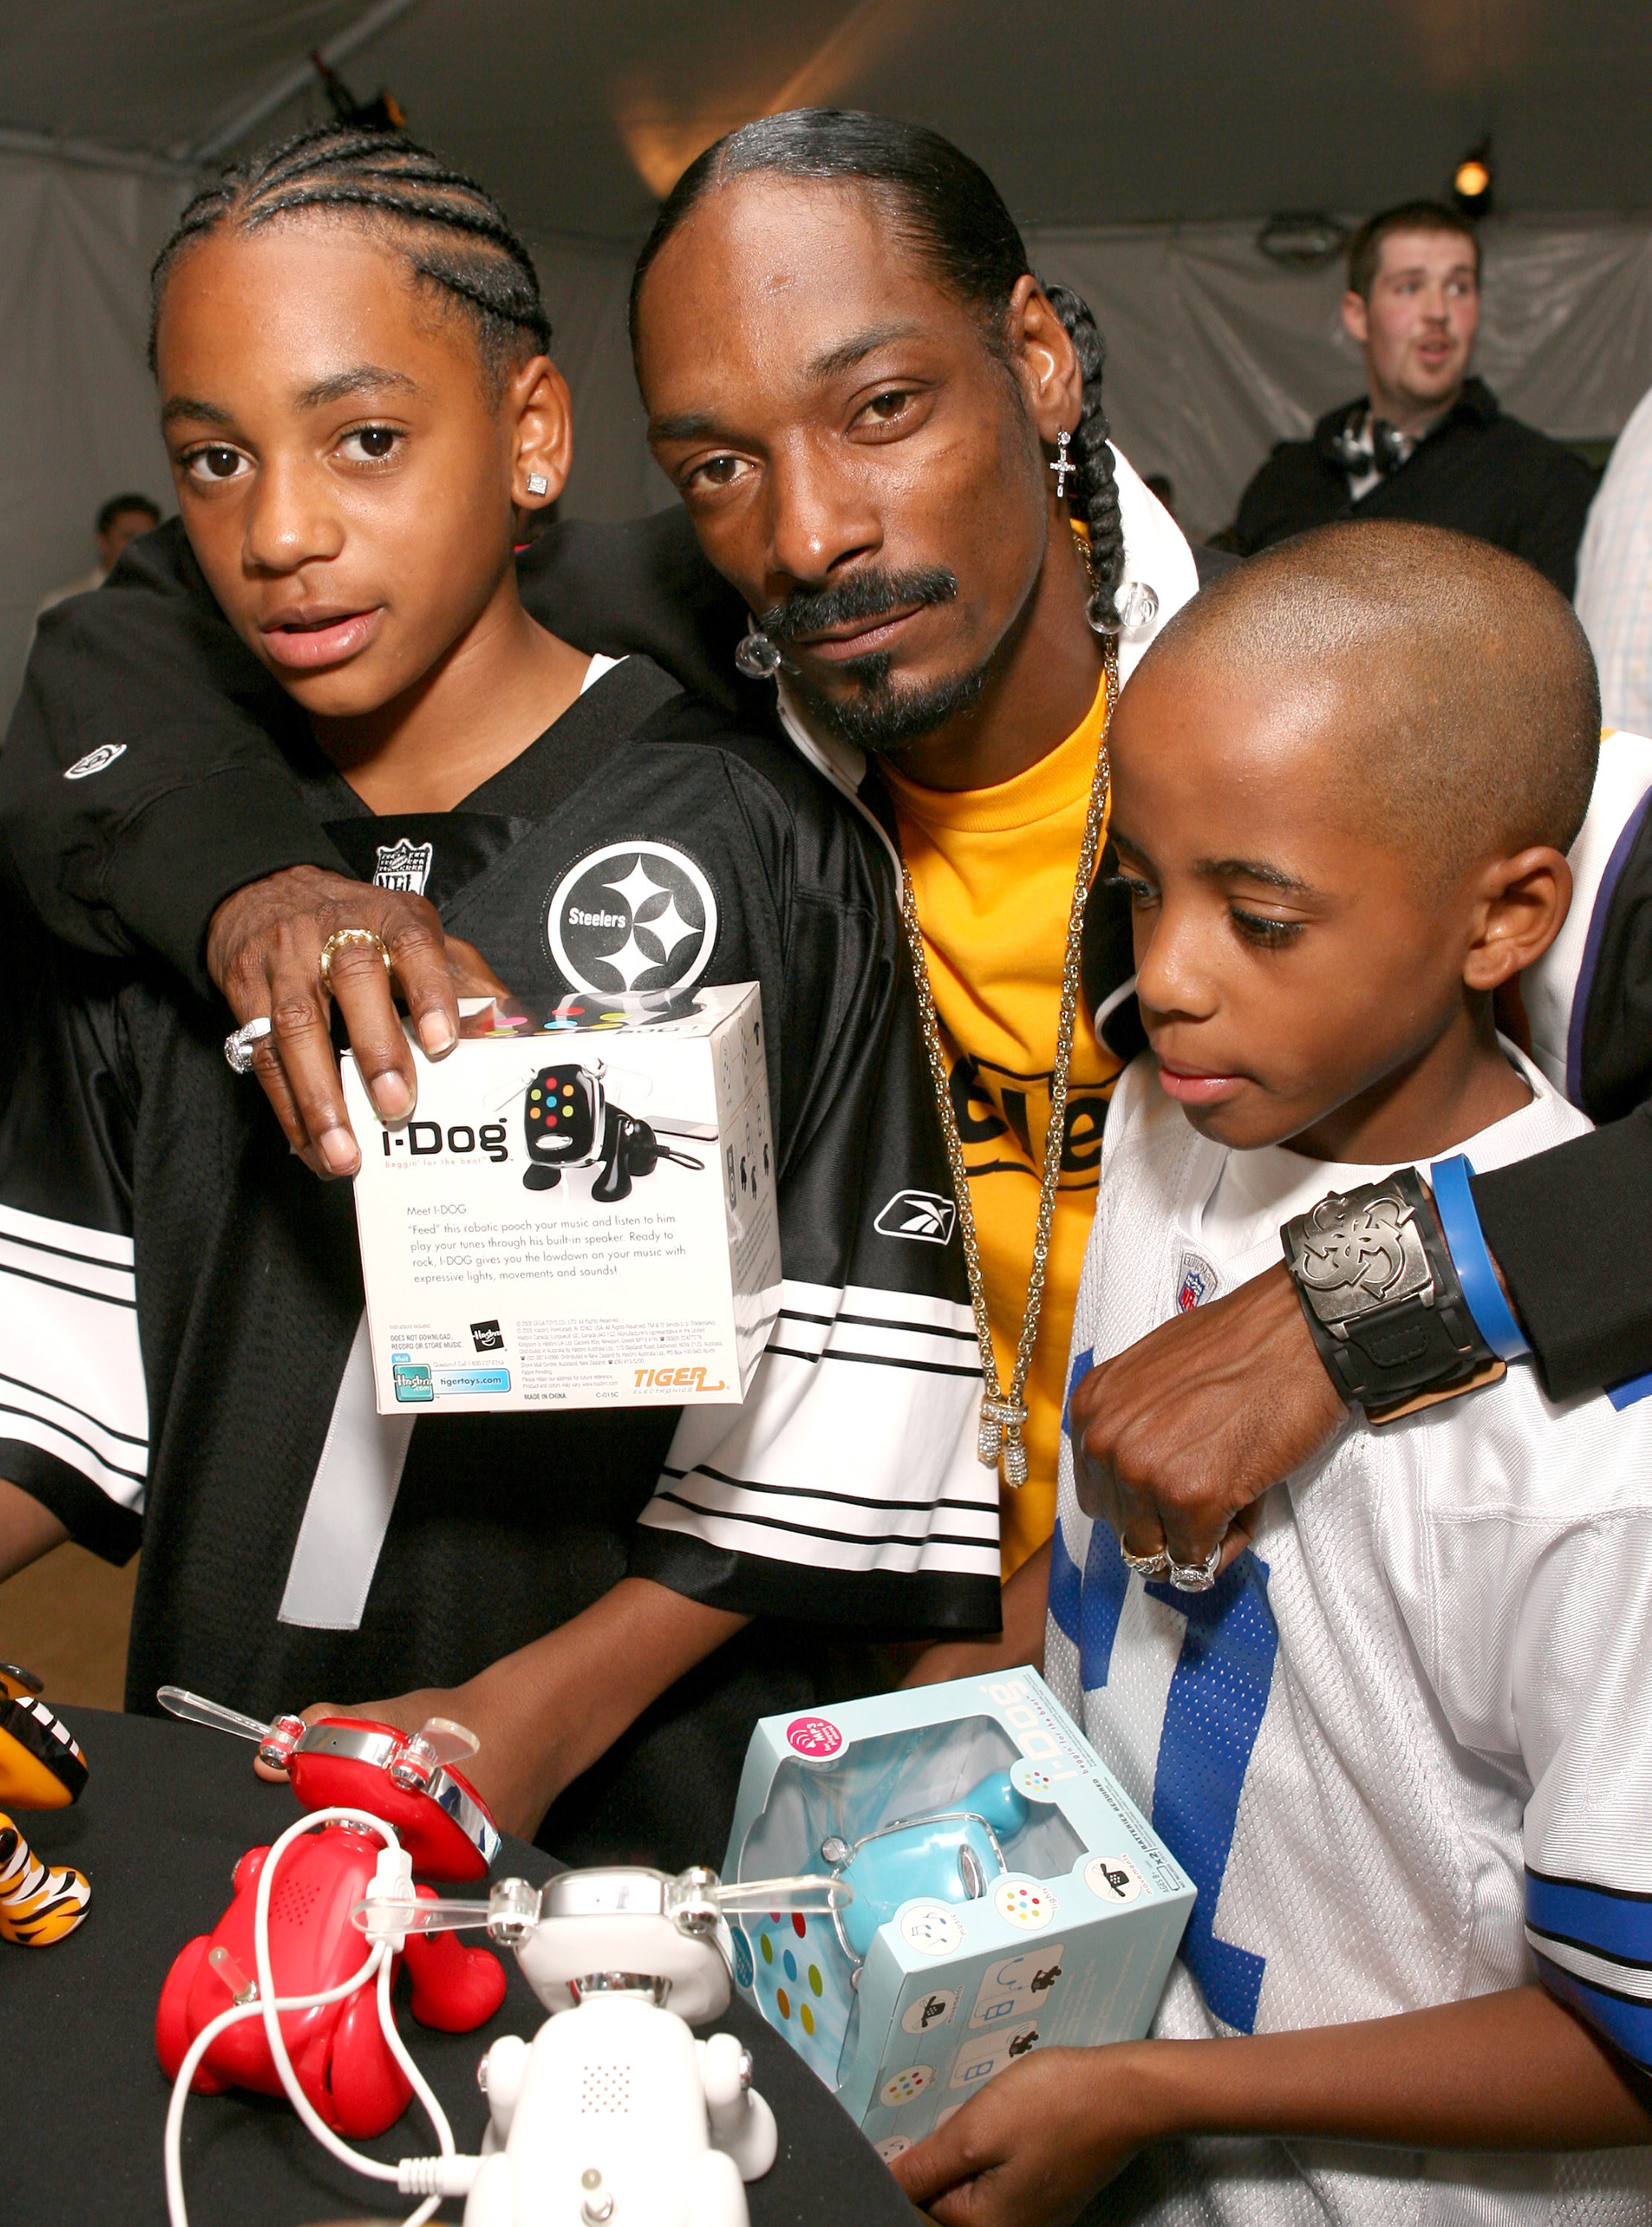 Cordell Broadus and Snoop Dogg